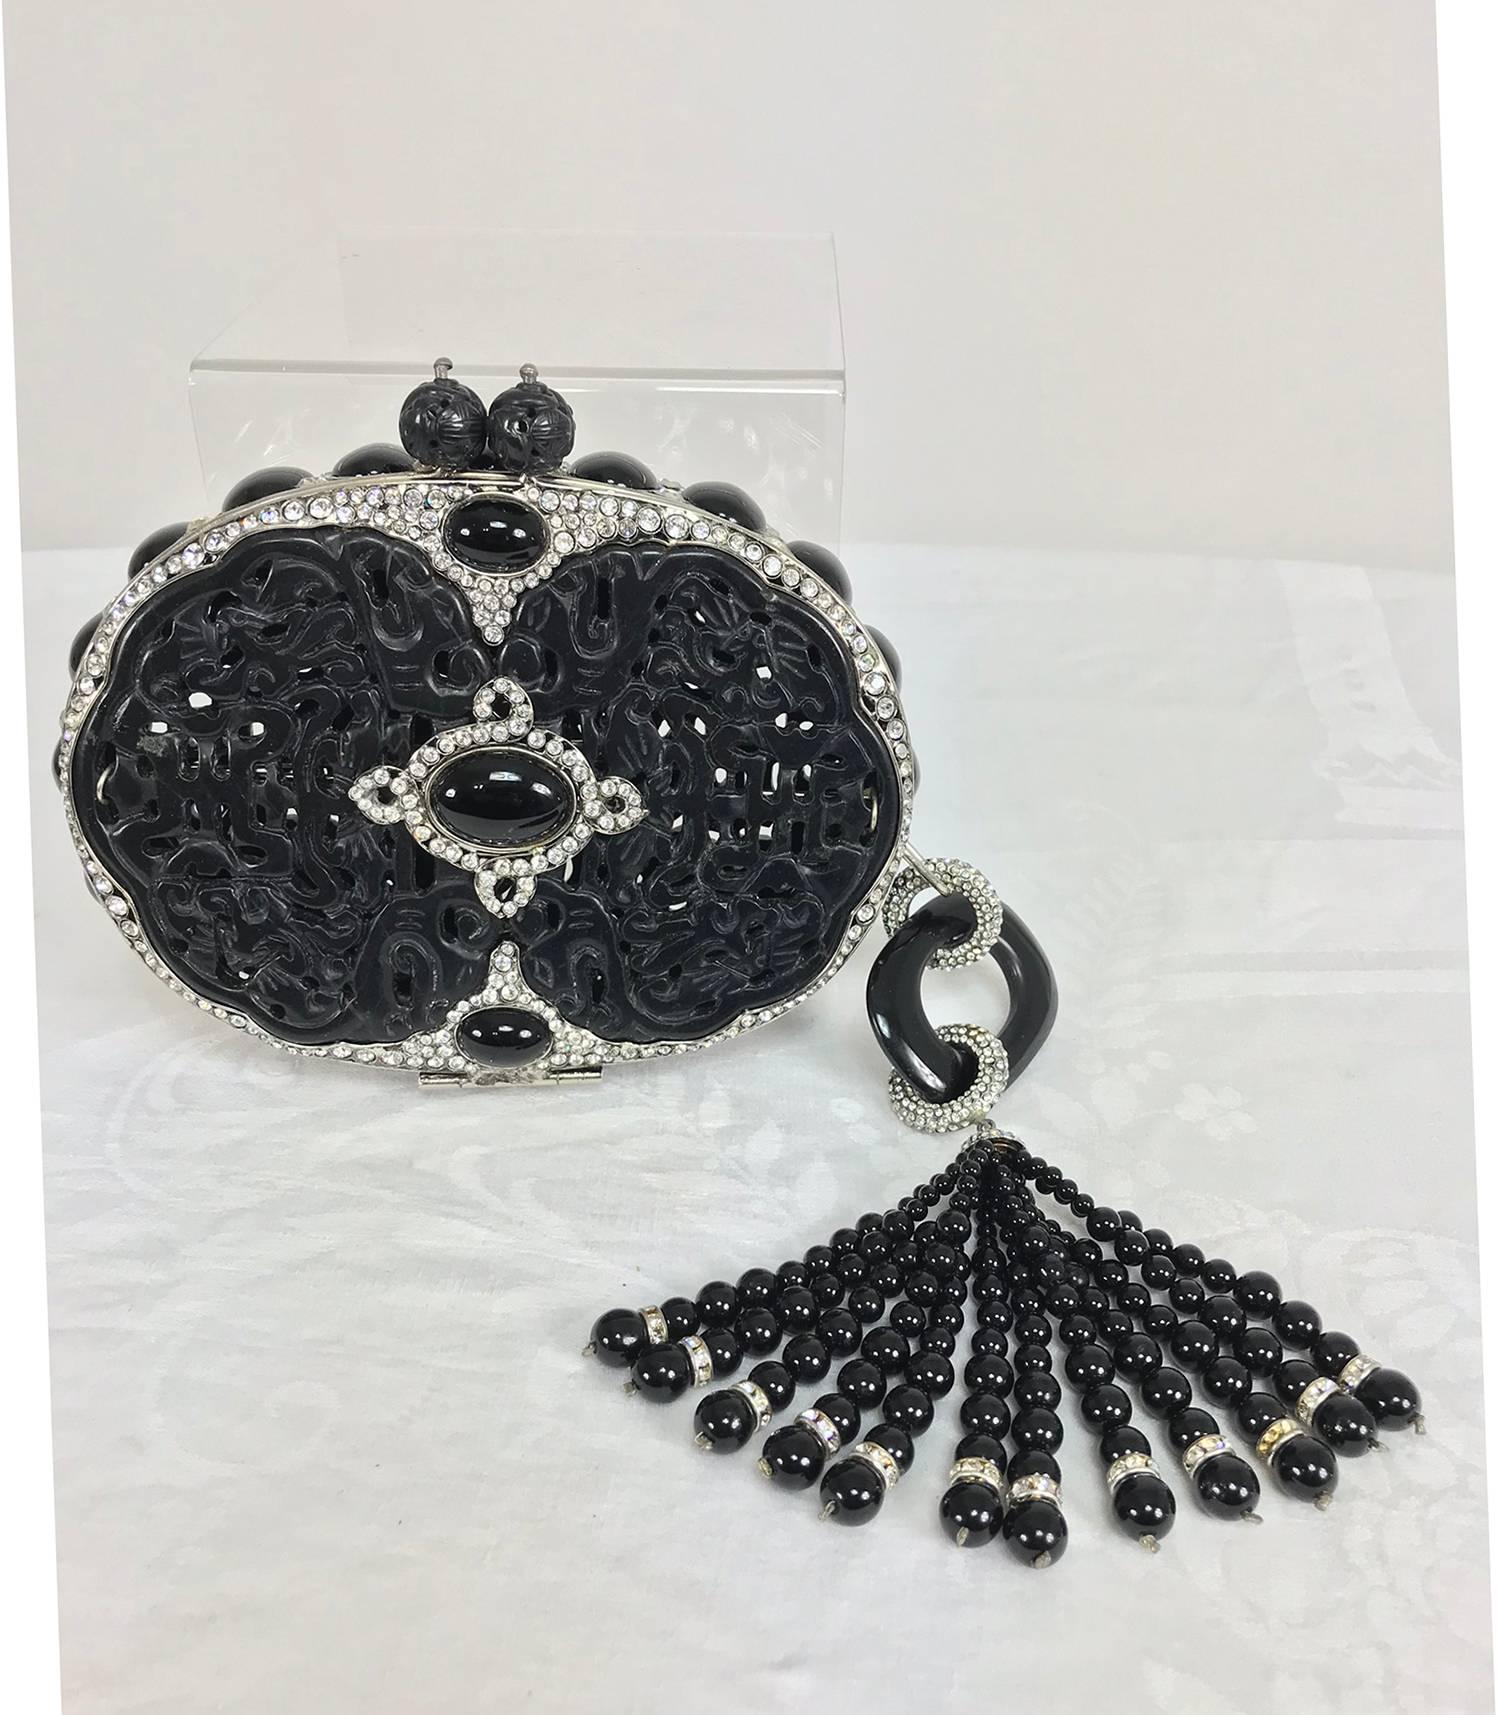 Iradj Moini Carved Black Jade Minaudière with rhinestone accents and extraordinary tassel...This rare and exotic bag from renowned jeweler Iradj Moini is a jewel for the evening table...Oval bag with an interior metal frame, the outside of the bag